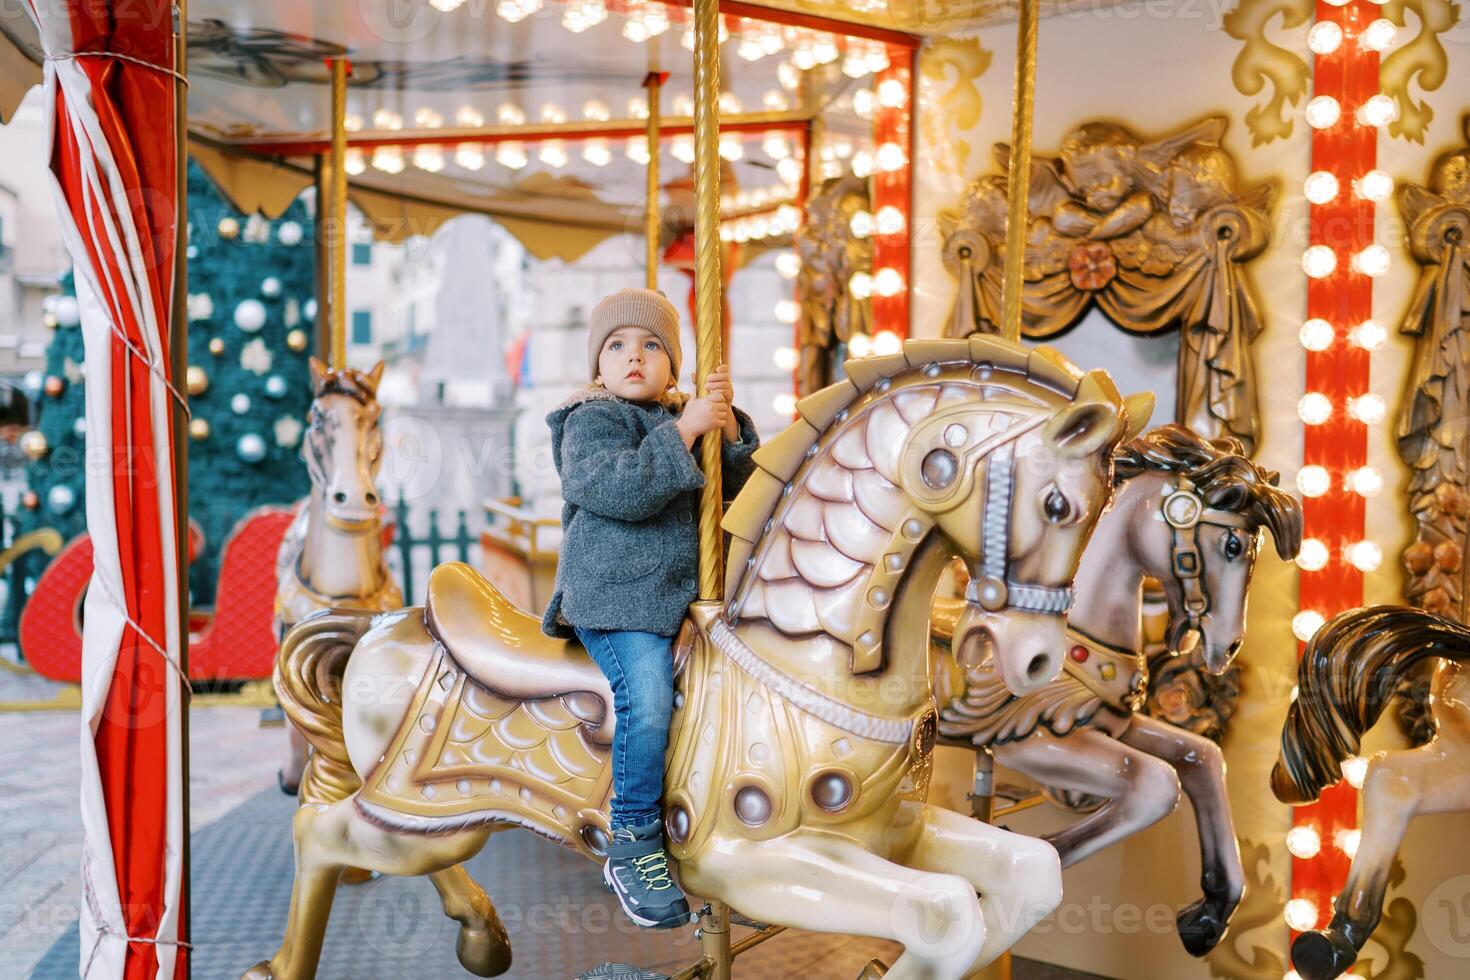 Little girl rides a toy horse on a carousel in the square near a decorated Christmas tree photo